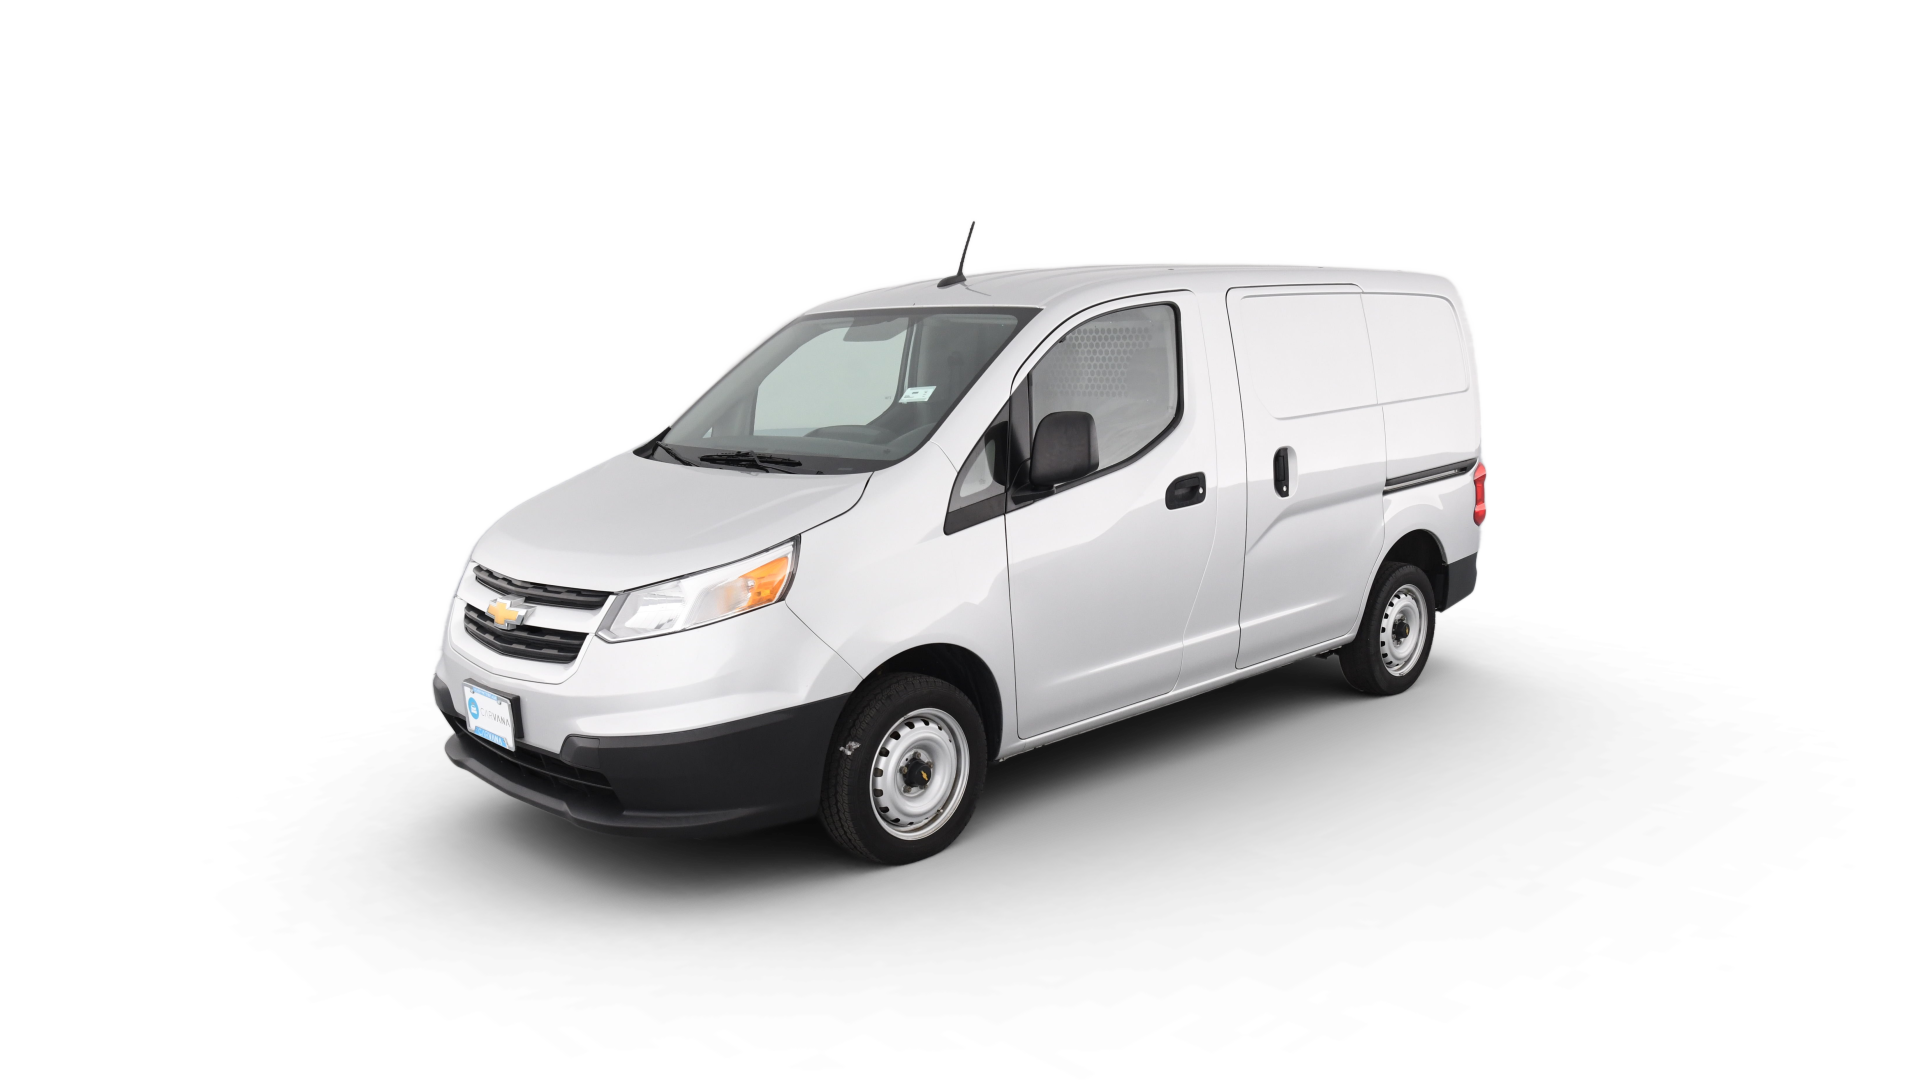 Used Chevrolet City Express For Sale Online | Carvana